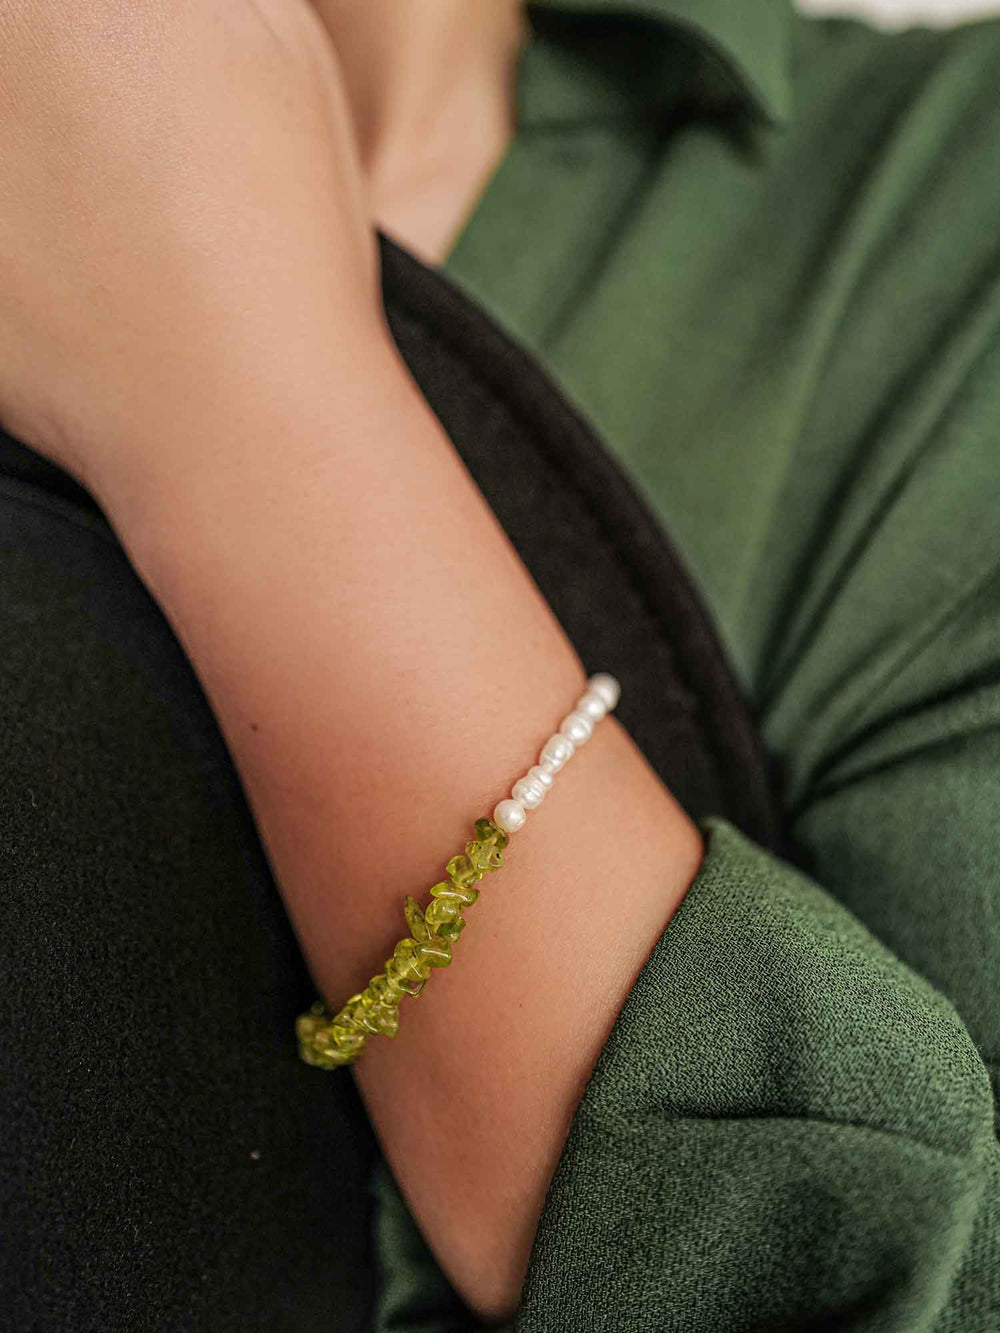 a hand with A bracelet of green stones and pearls